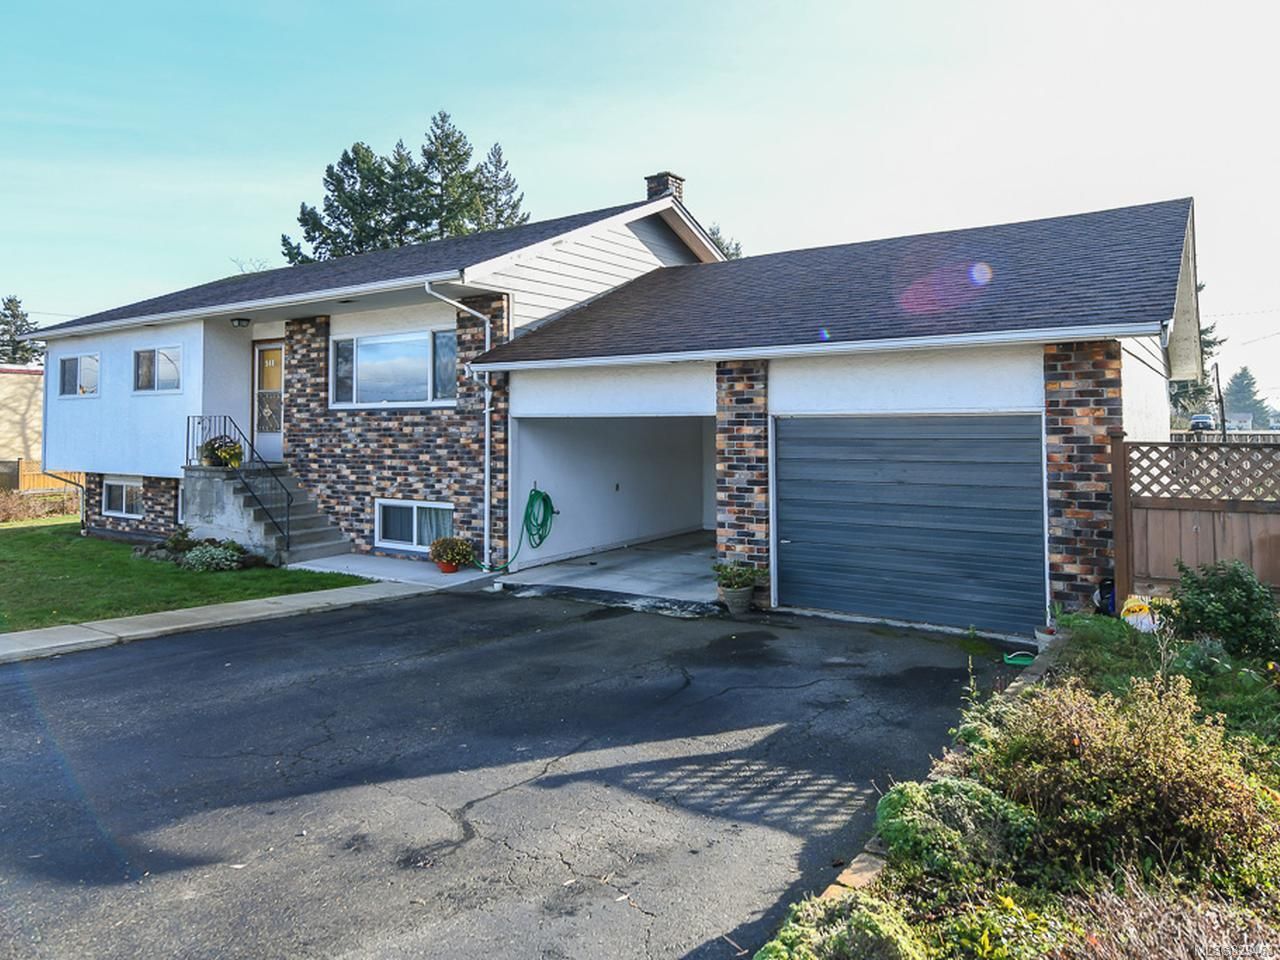 Main Photo: 540 17th St in COURTENAY: CV Courtenay City House for sale (Comox Valley)  : MLS®# 829463